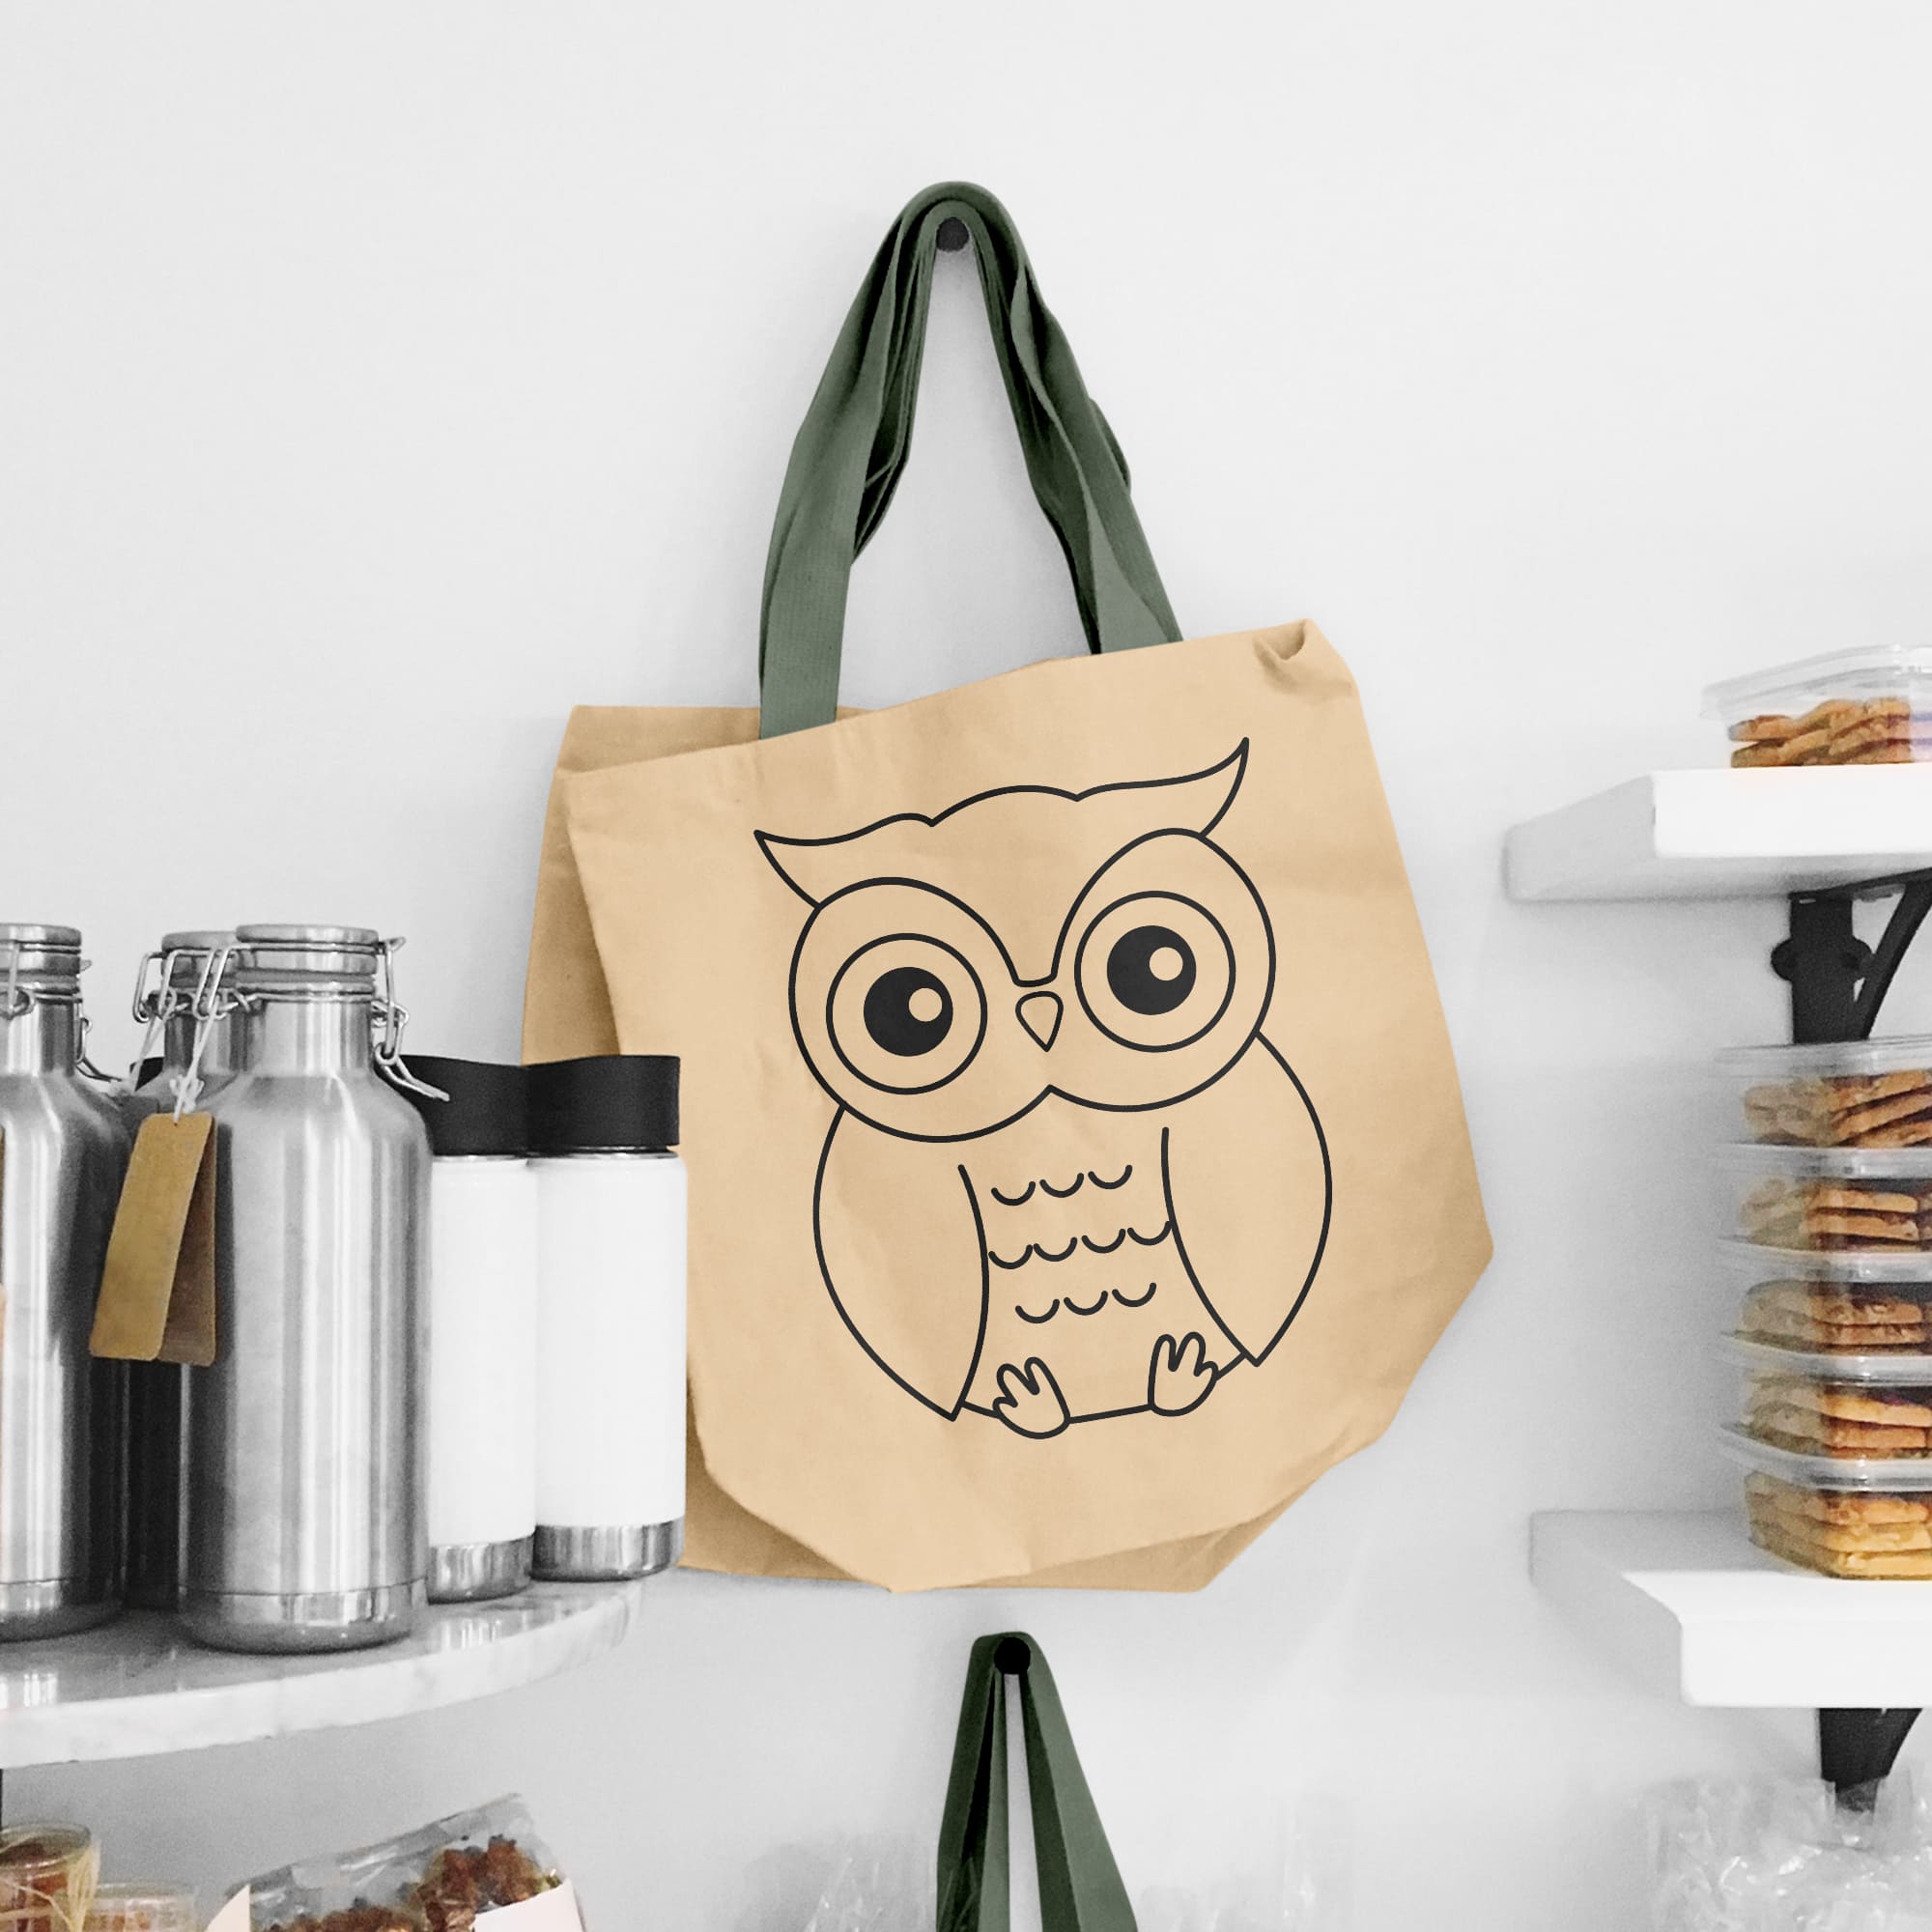 Brown bag with an owl drawn on it.